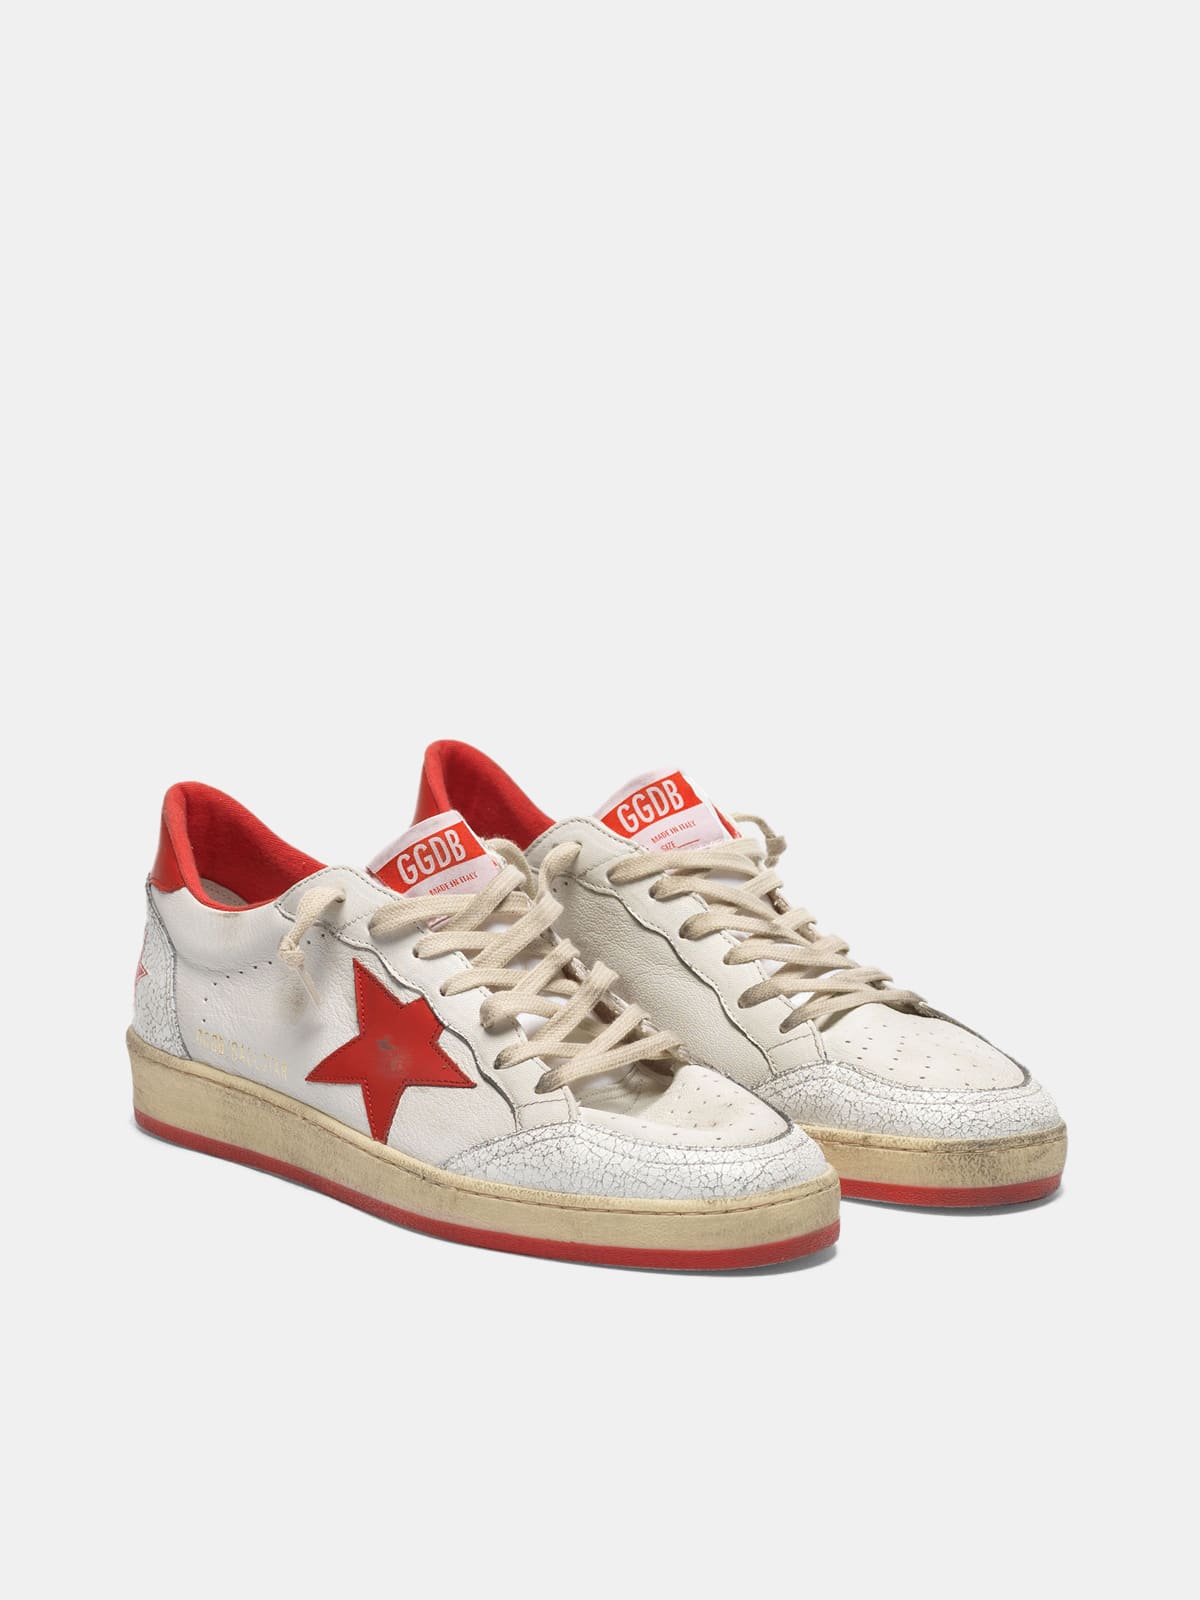 White Ball Star sneakers in leather with red star and heel tab | Golden  Goose